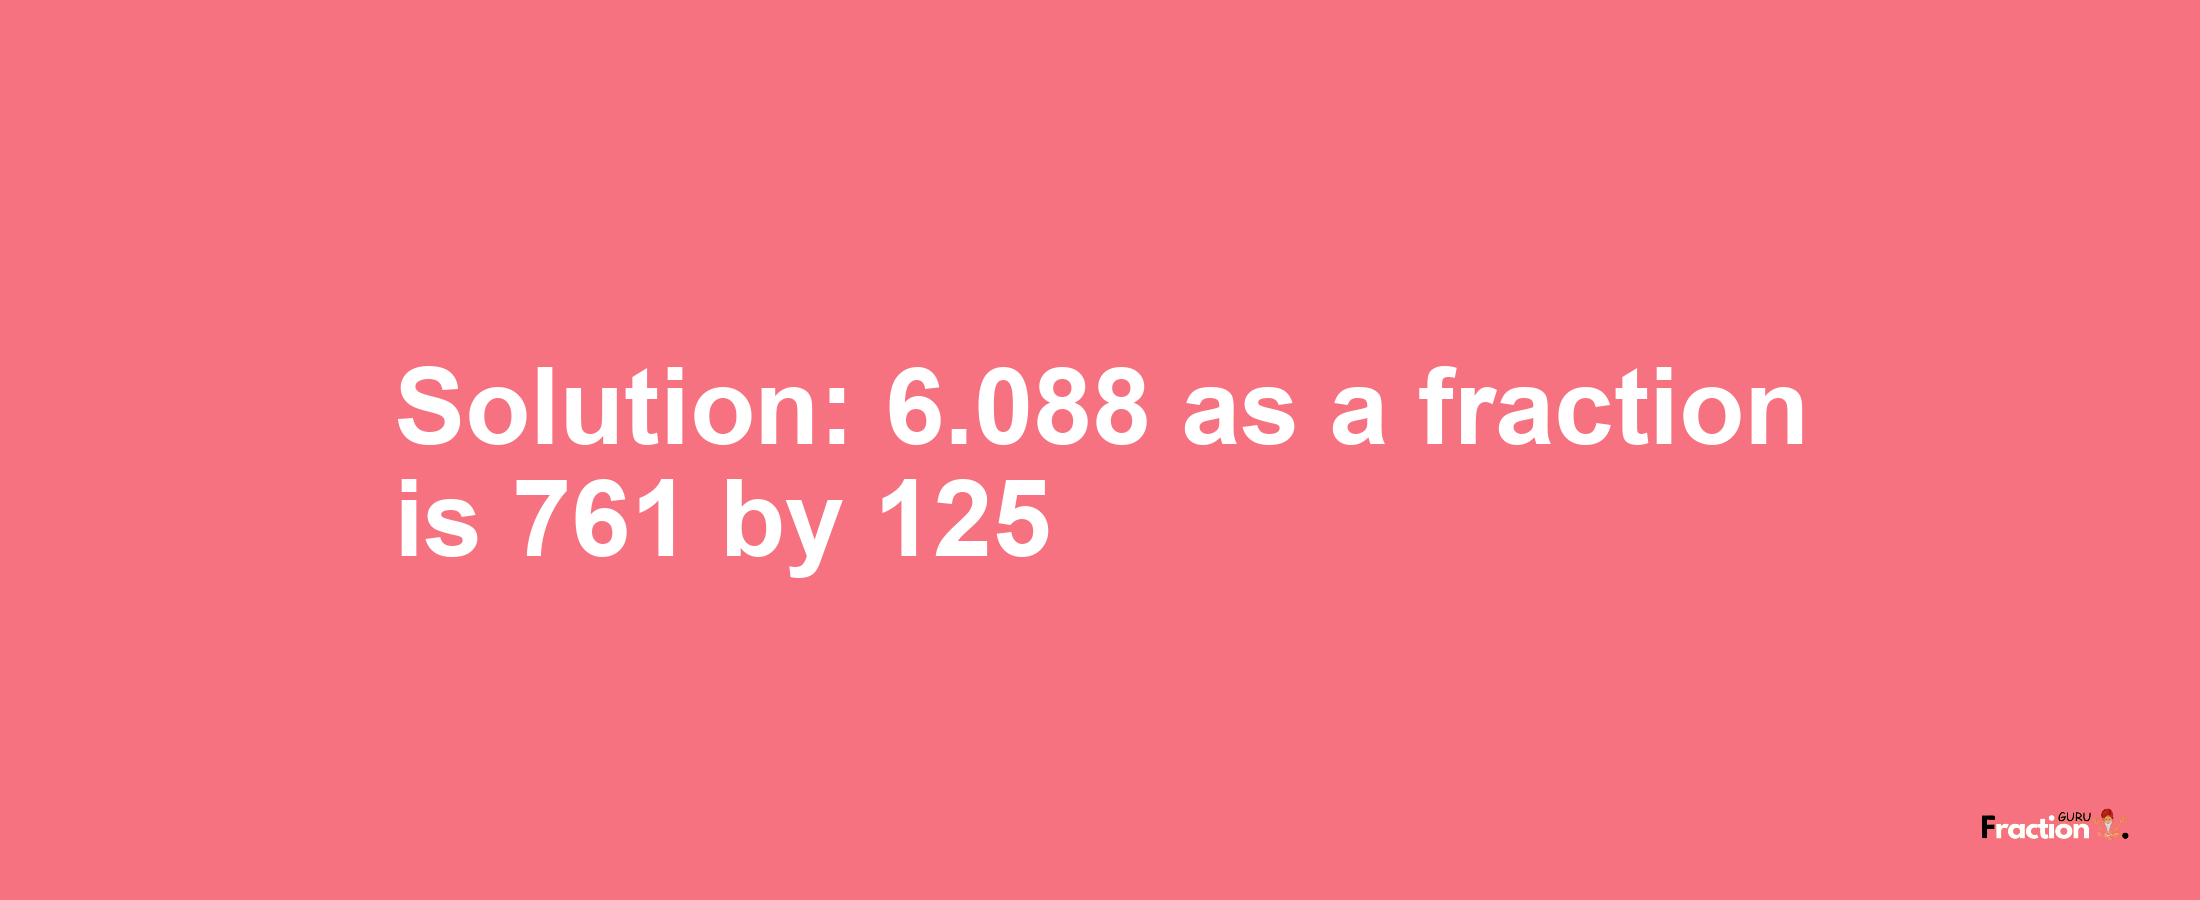 Solution:6.088 as a fraction is 761/125